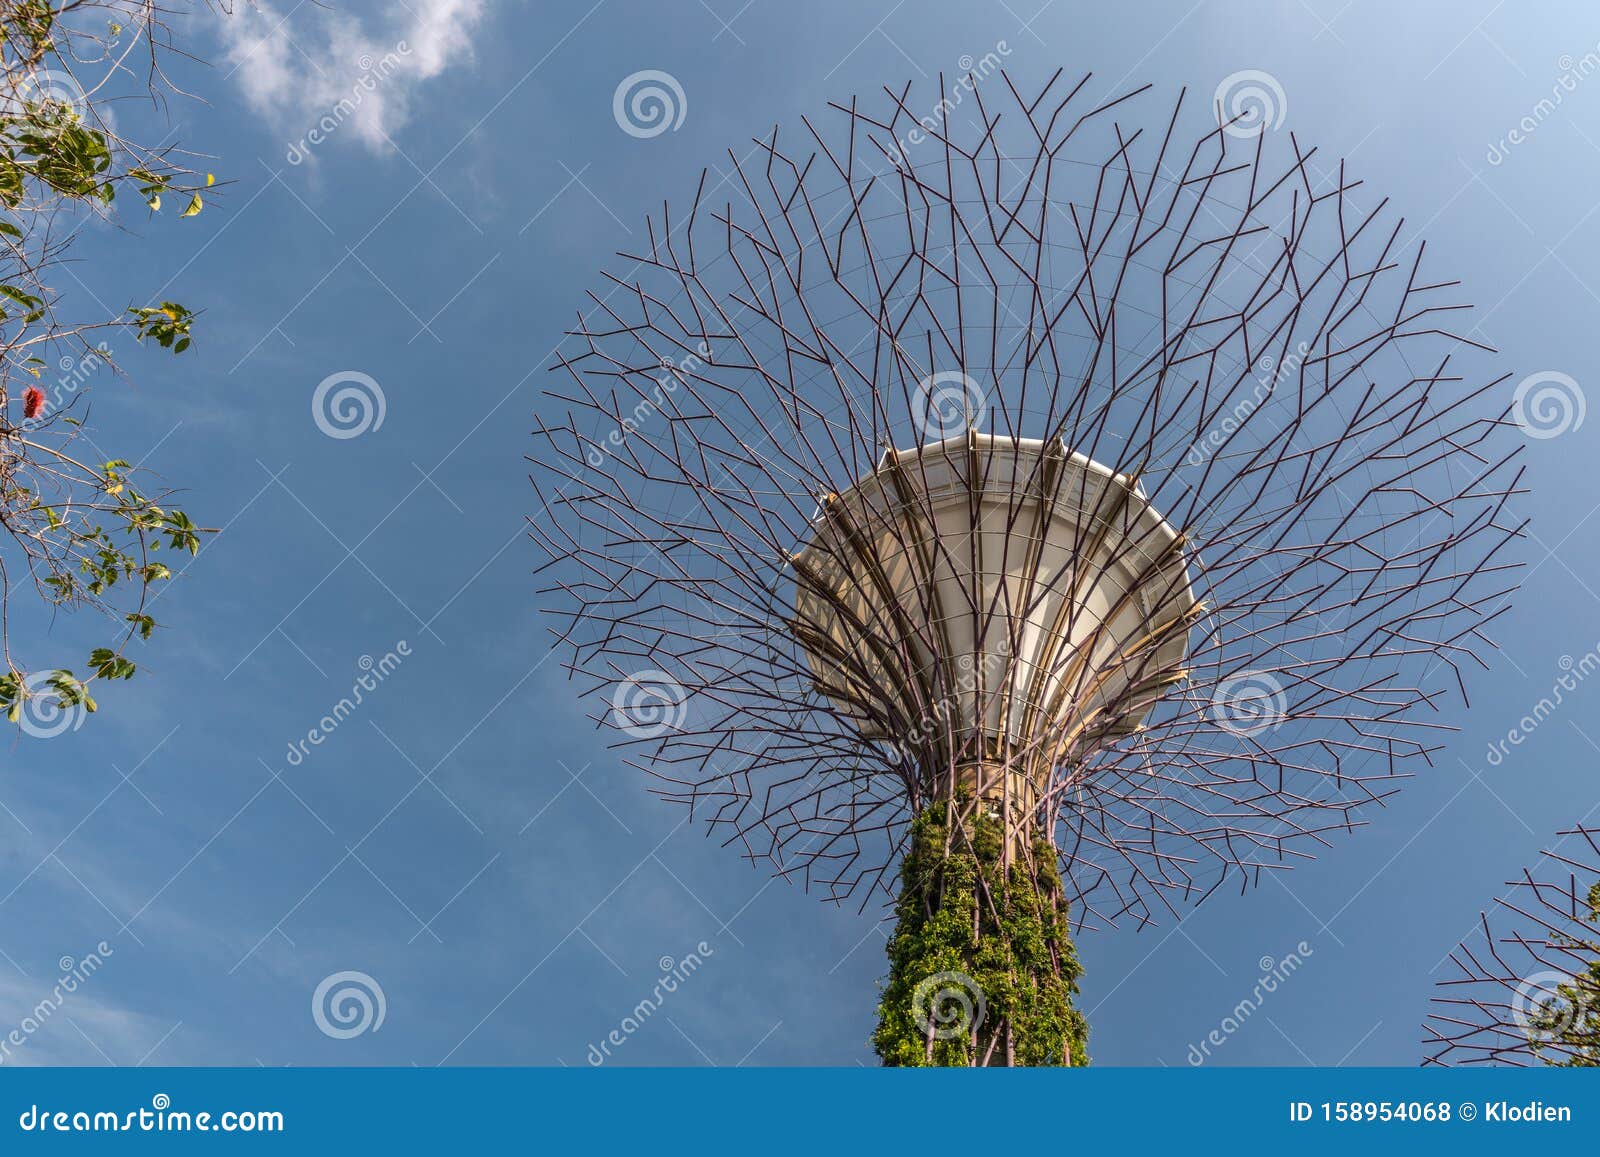 Naked Supertree In Golden Garden At Gardens By The Bay Singapore